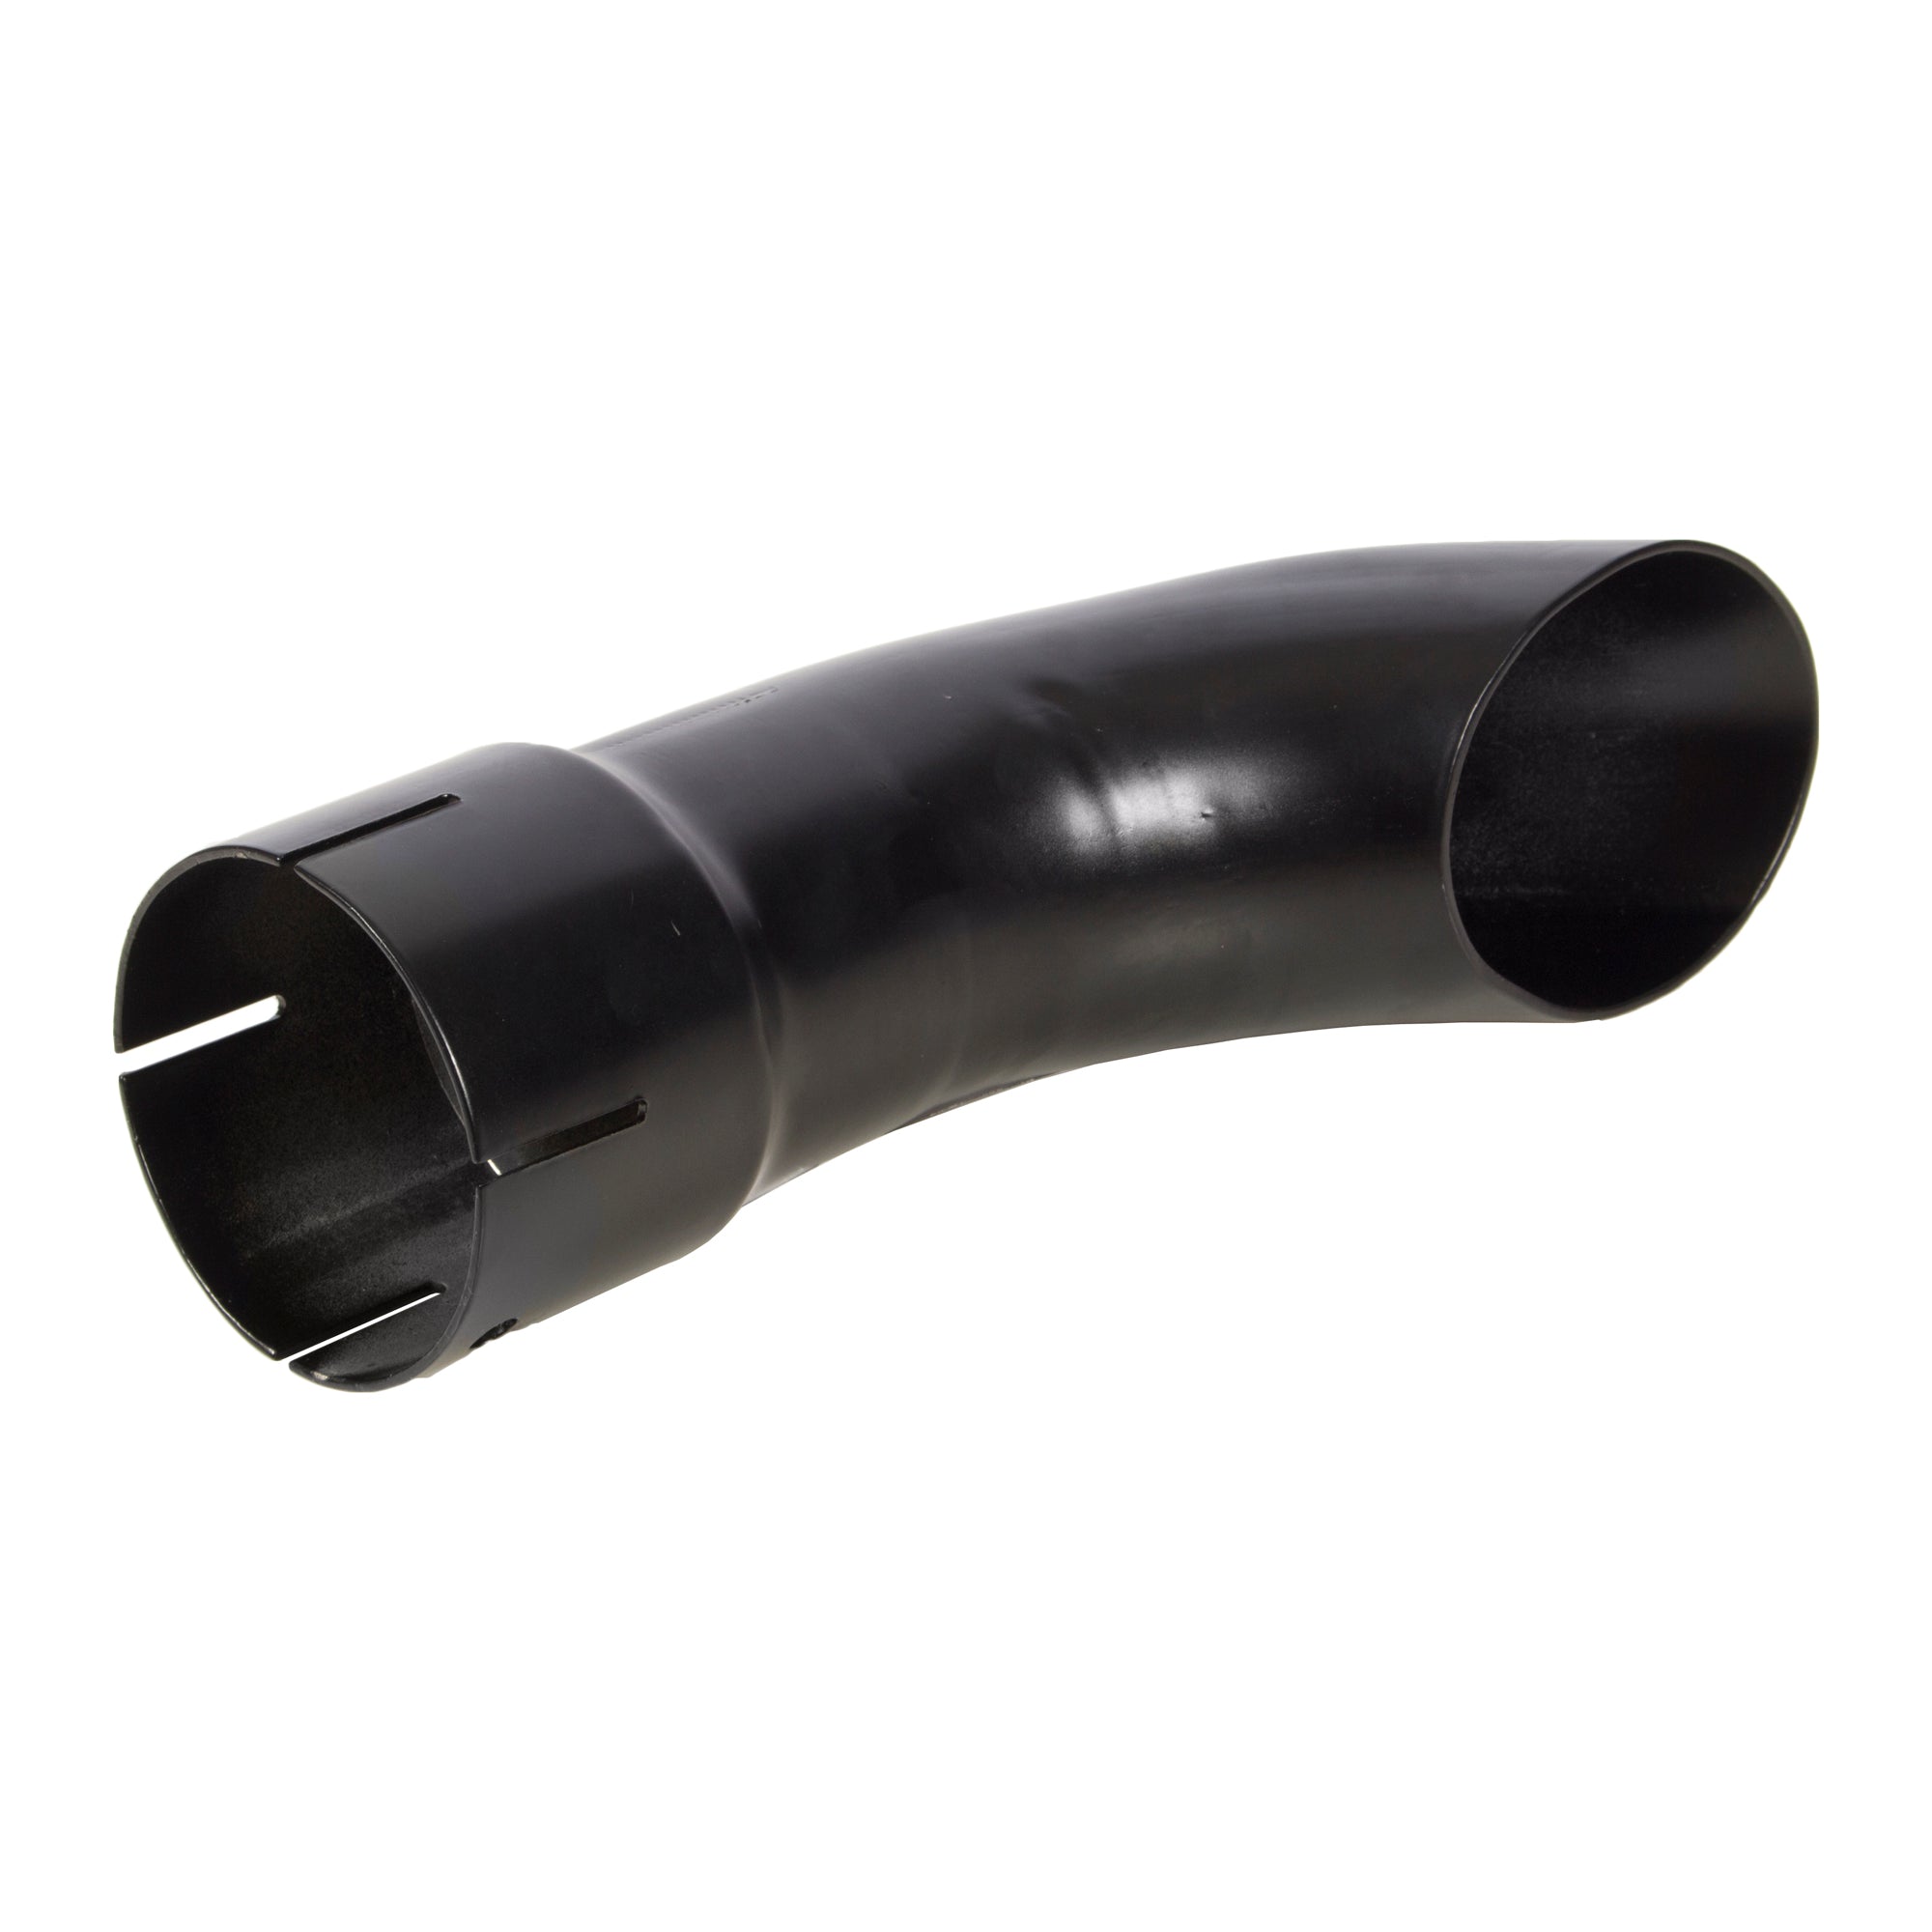 Exhaust Stack Pipe Replacement for UNIVERSAL  - 3-3/16" x 10.75"